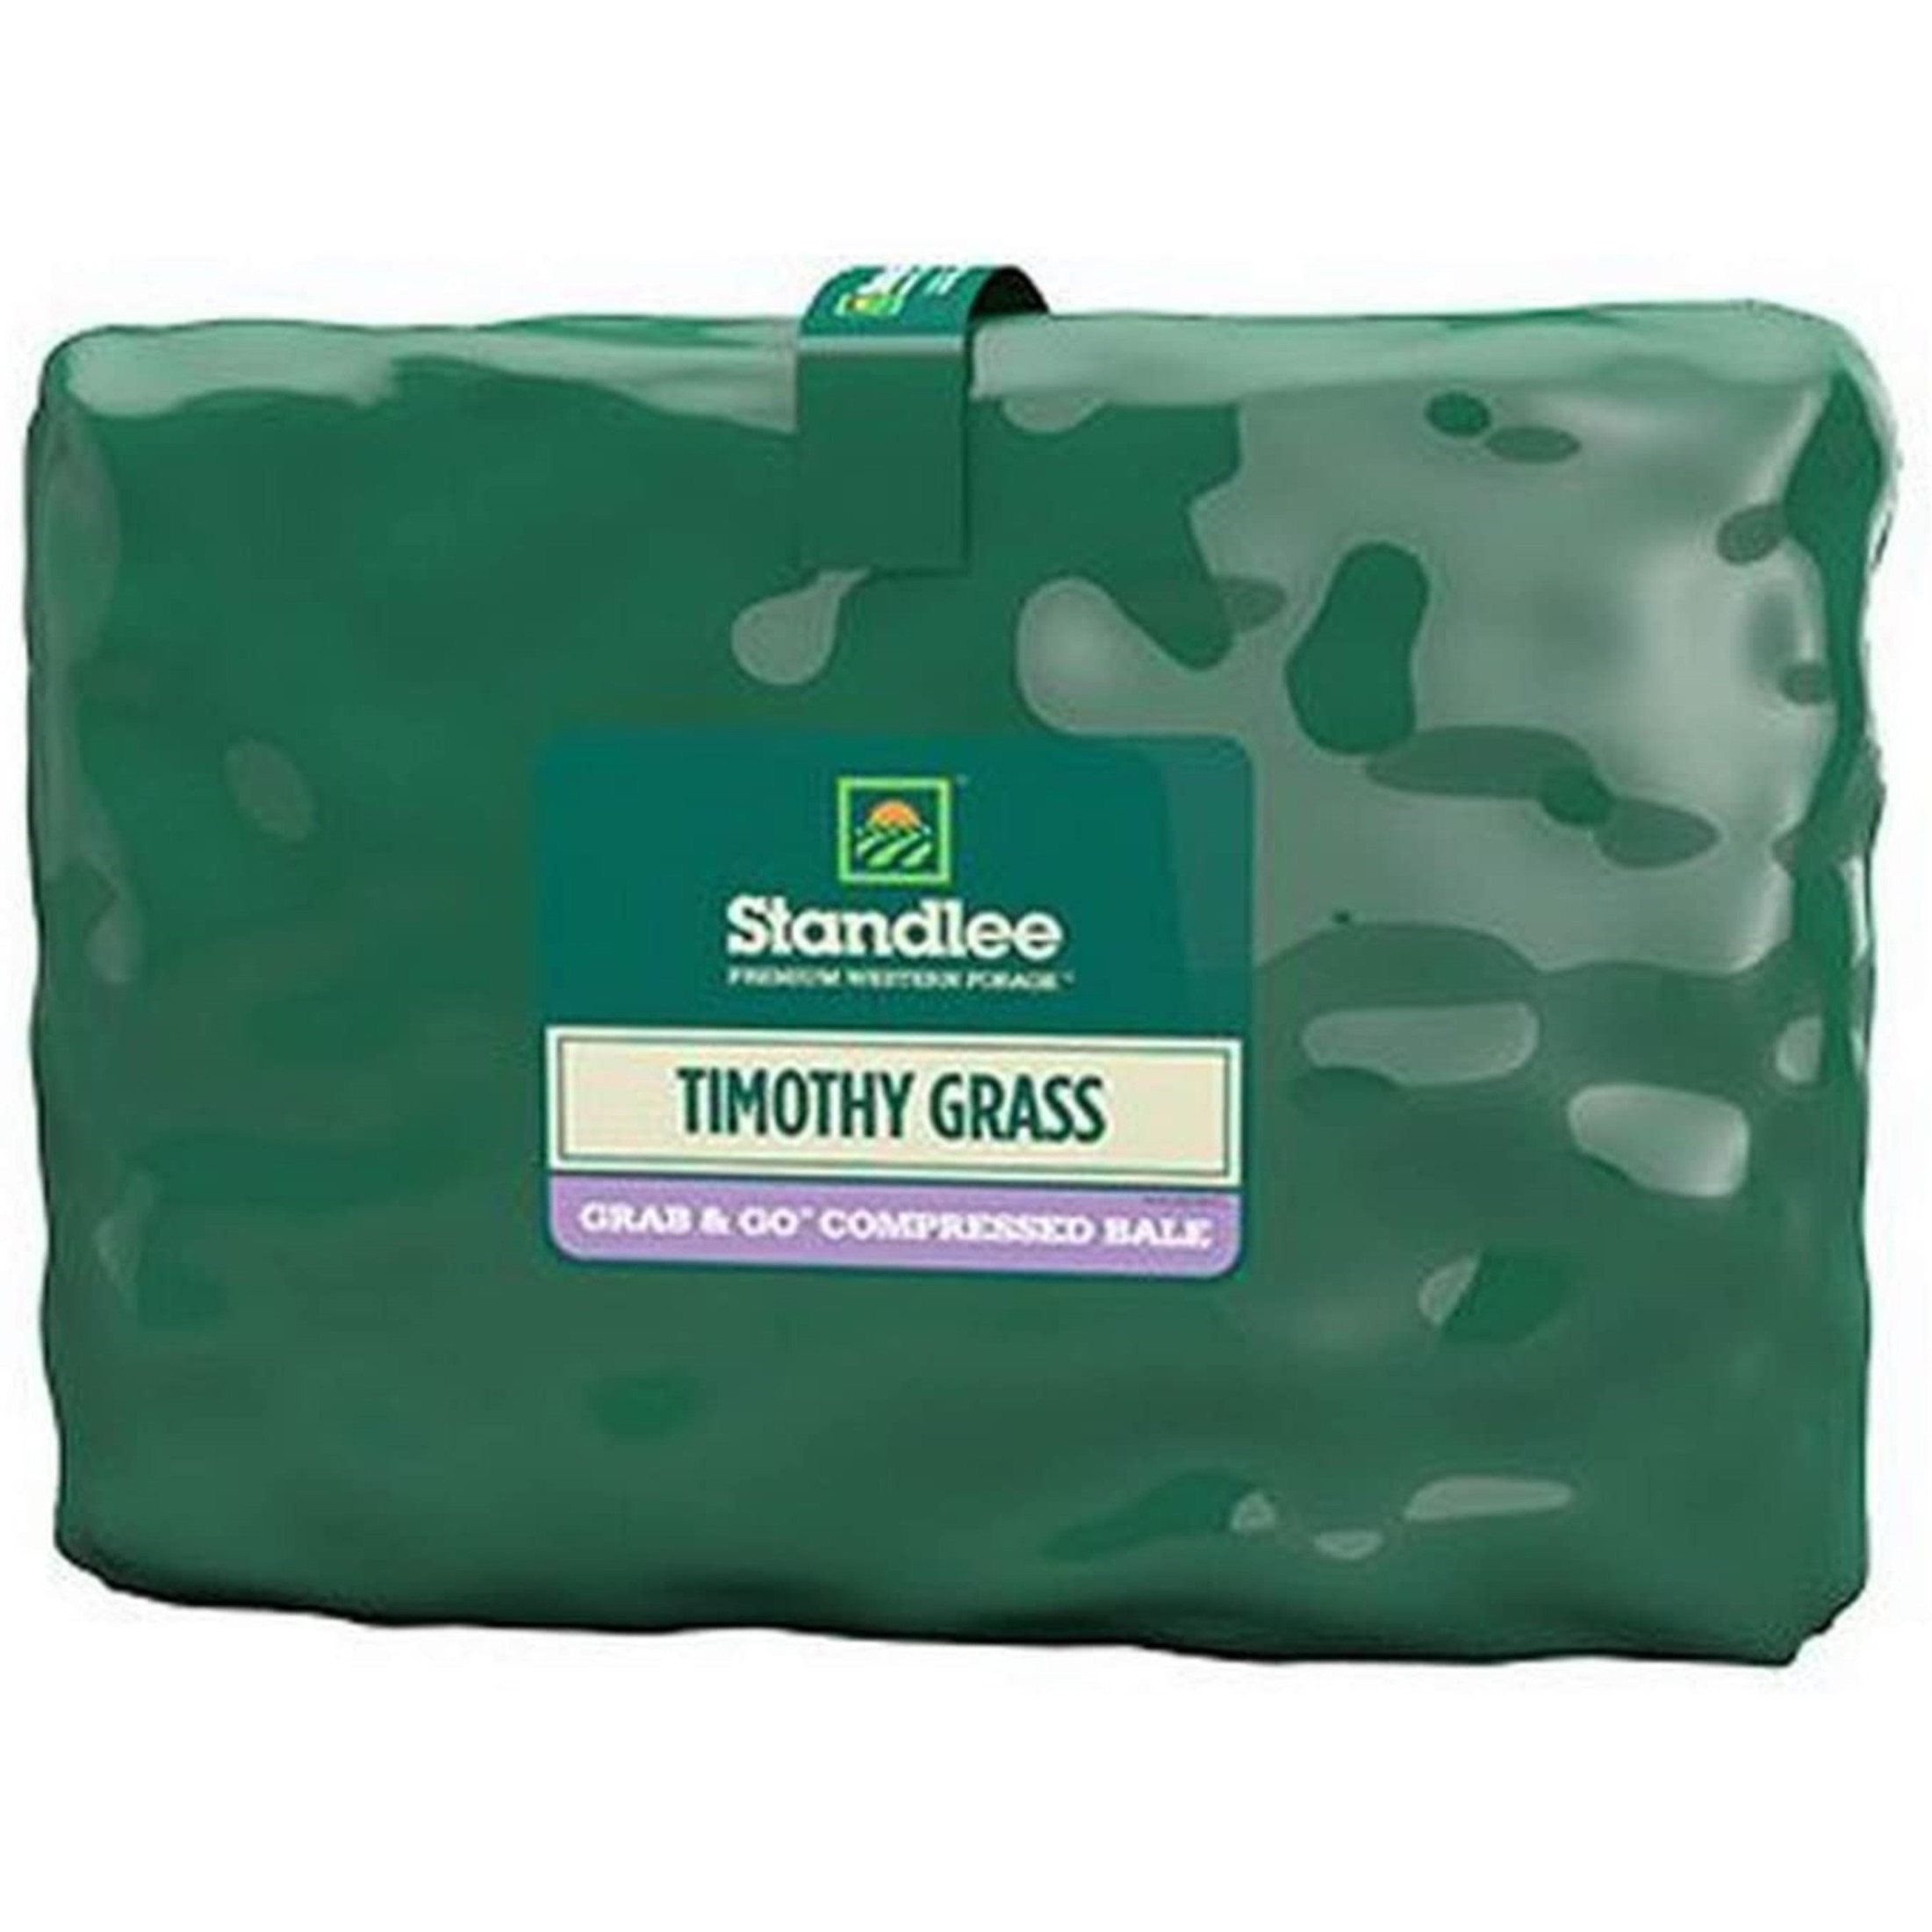 Standlee Premium Timothy Grass Grab & Go Compressed Bale Animal Feed, 50 lbs